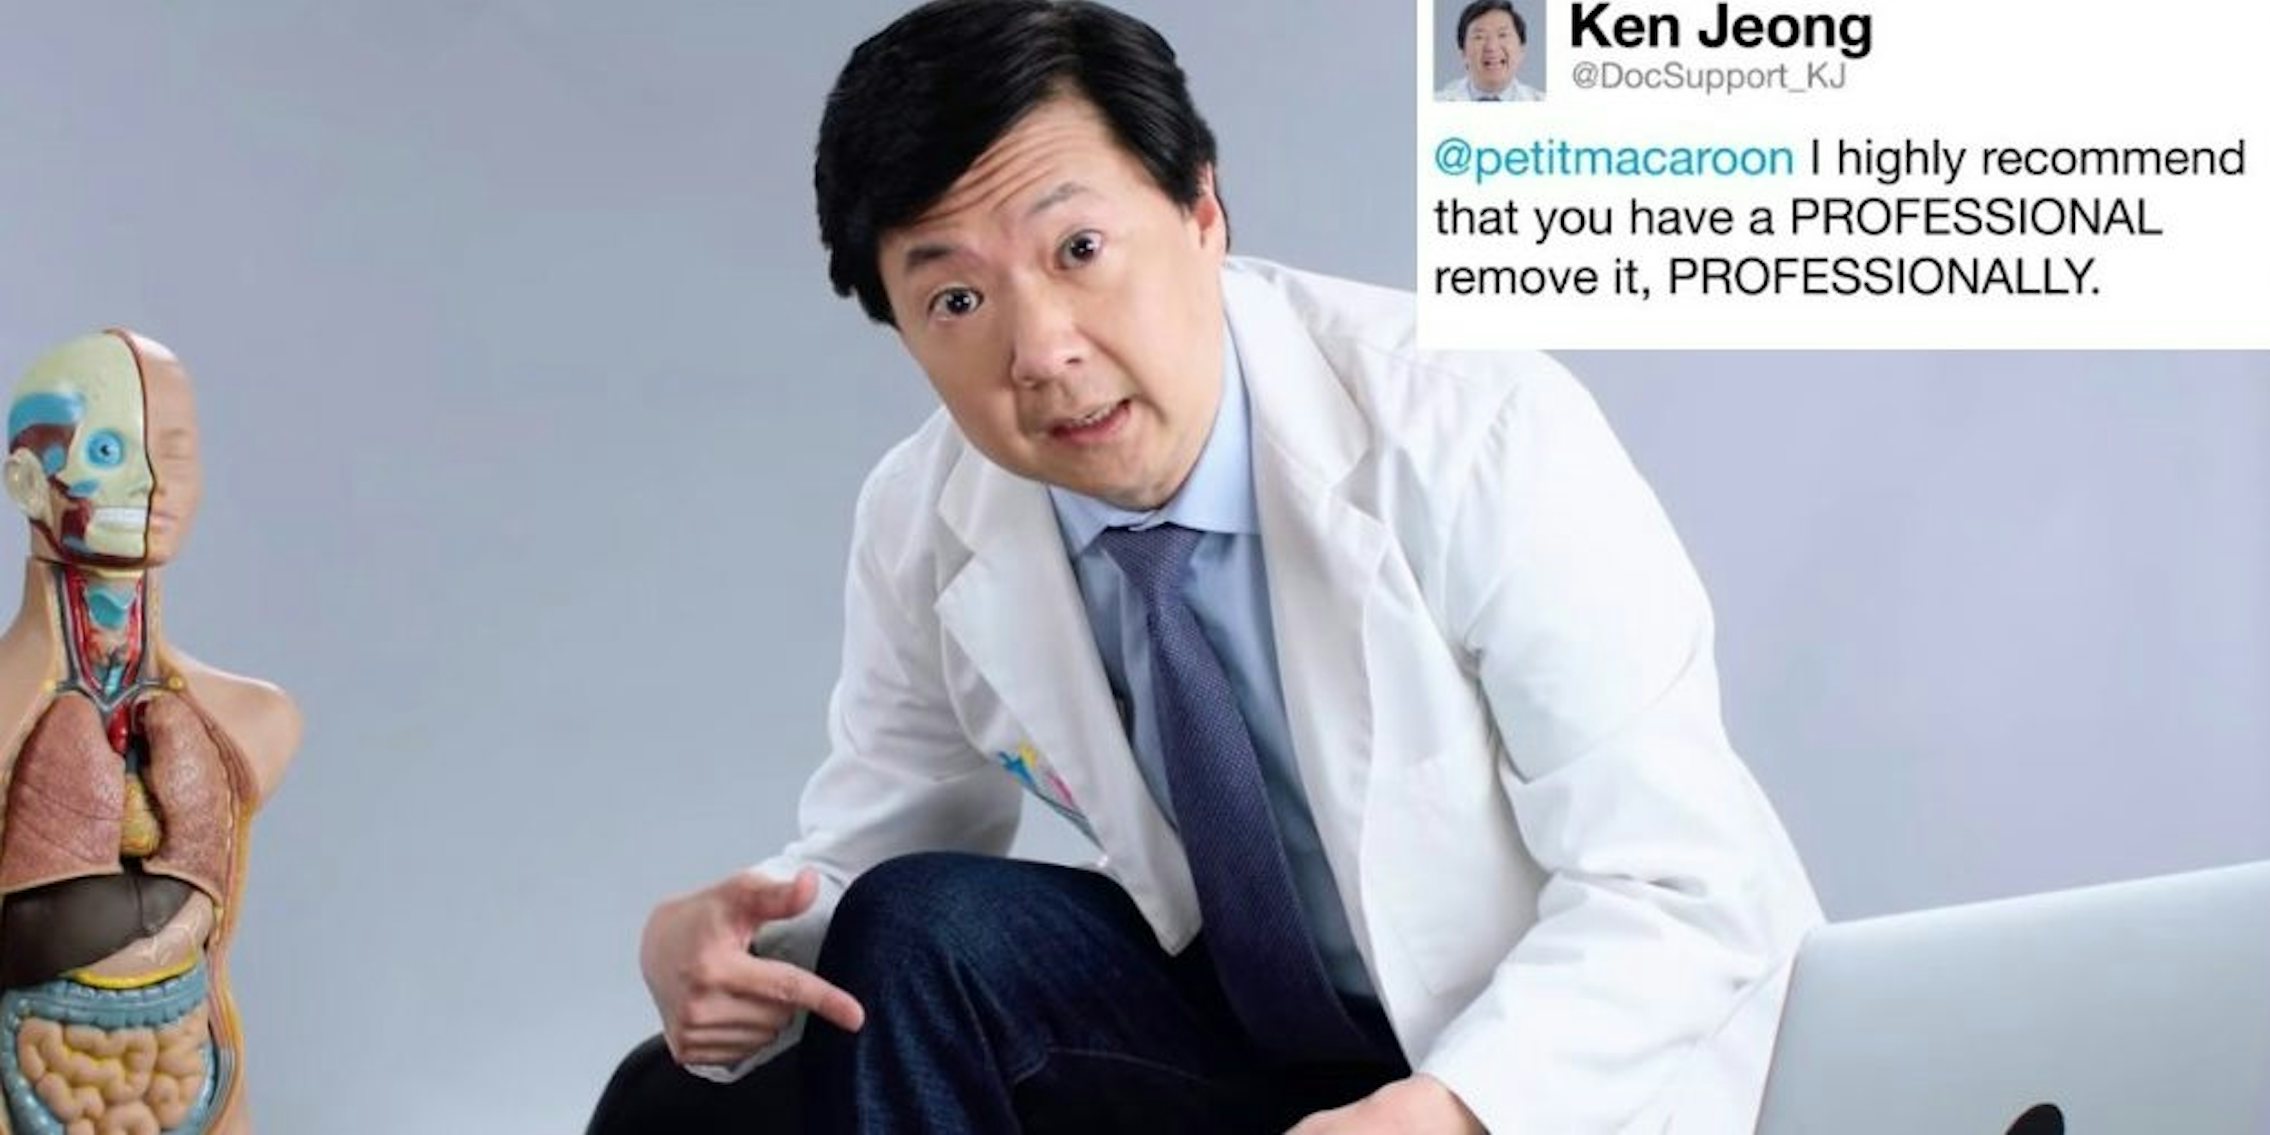 Ken Jeong answers medical questions hangover